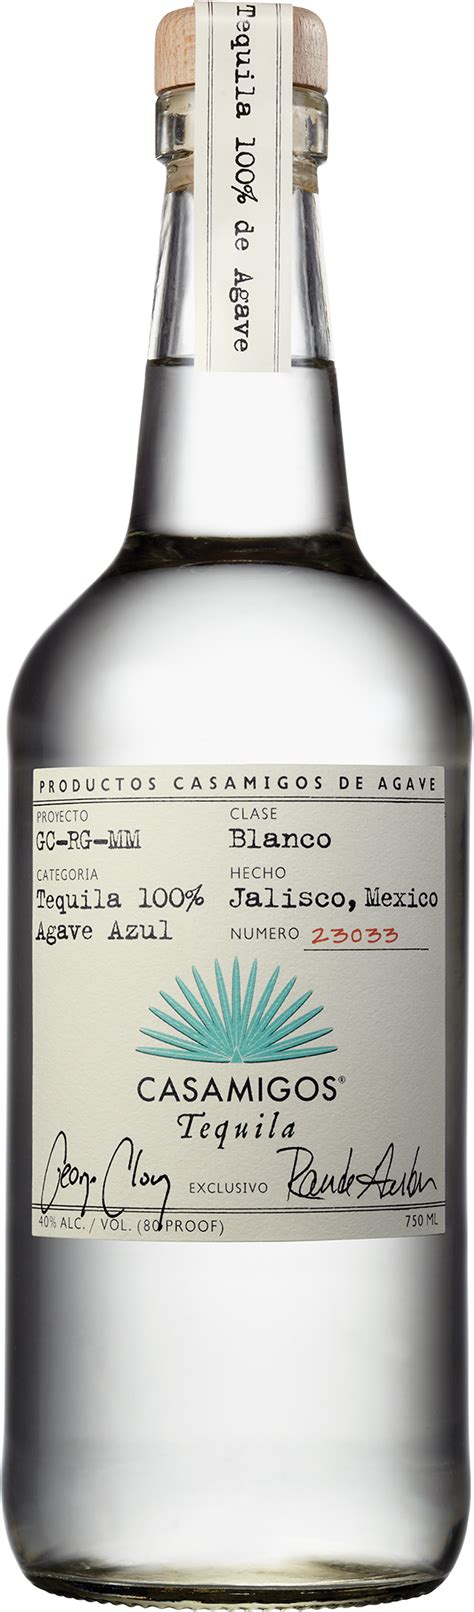 Casamigos Blanco Tequila 175l The Wine Guy